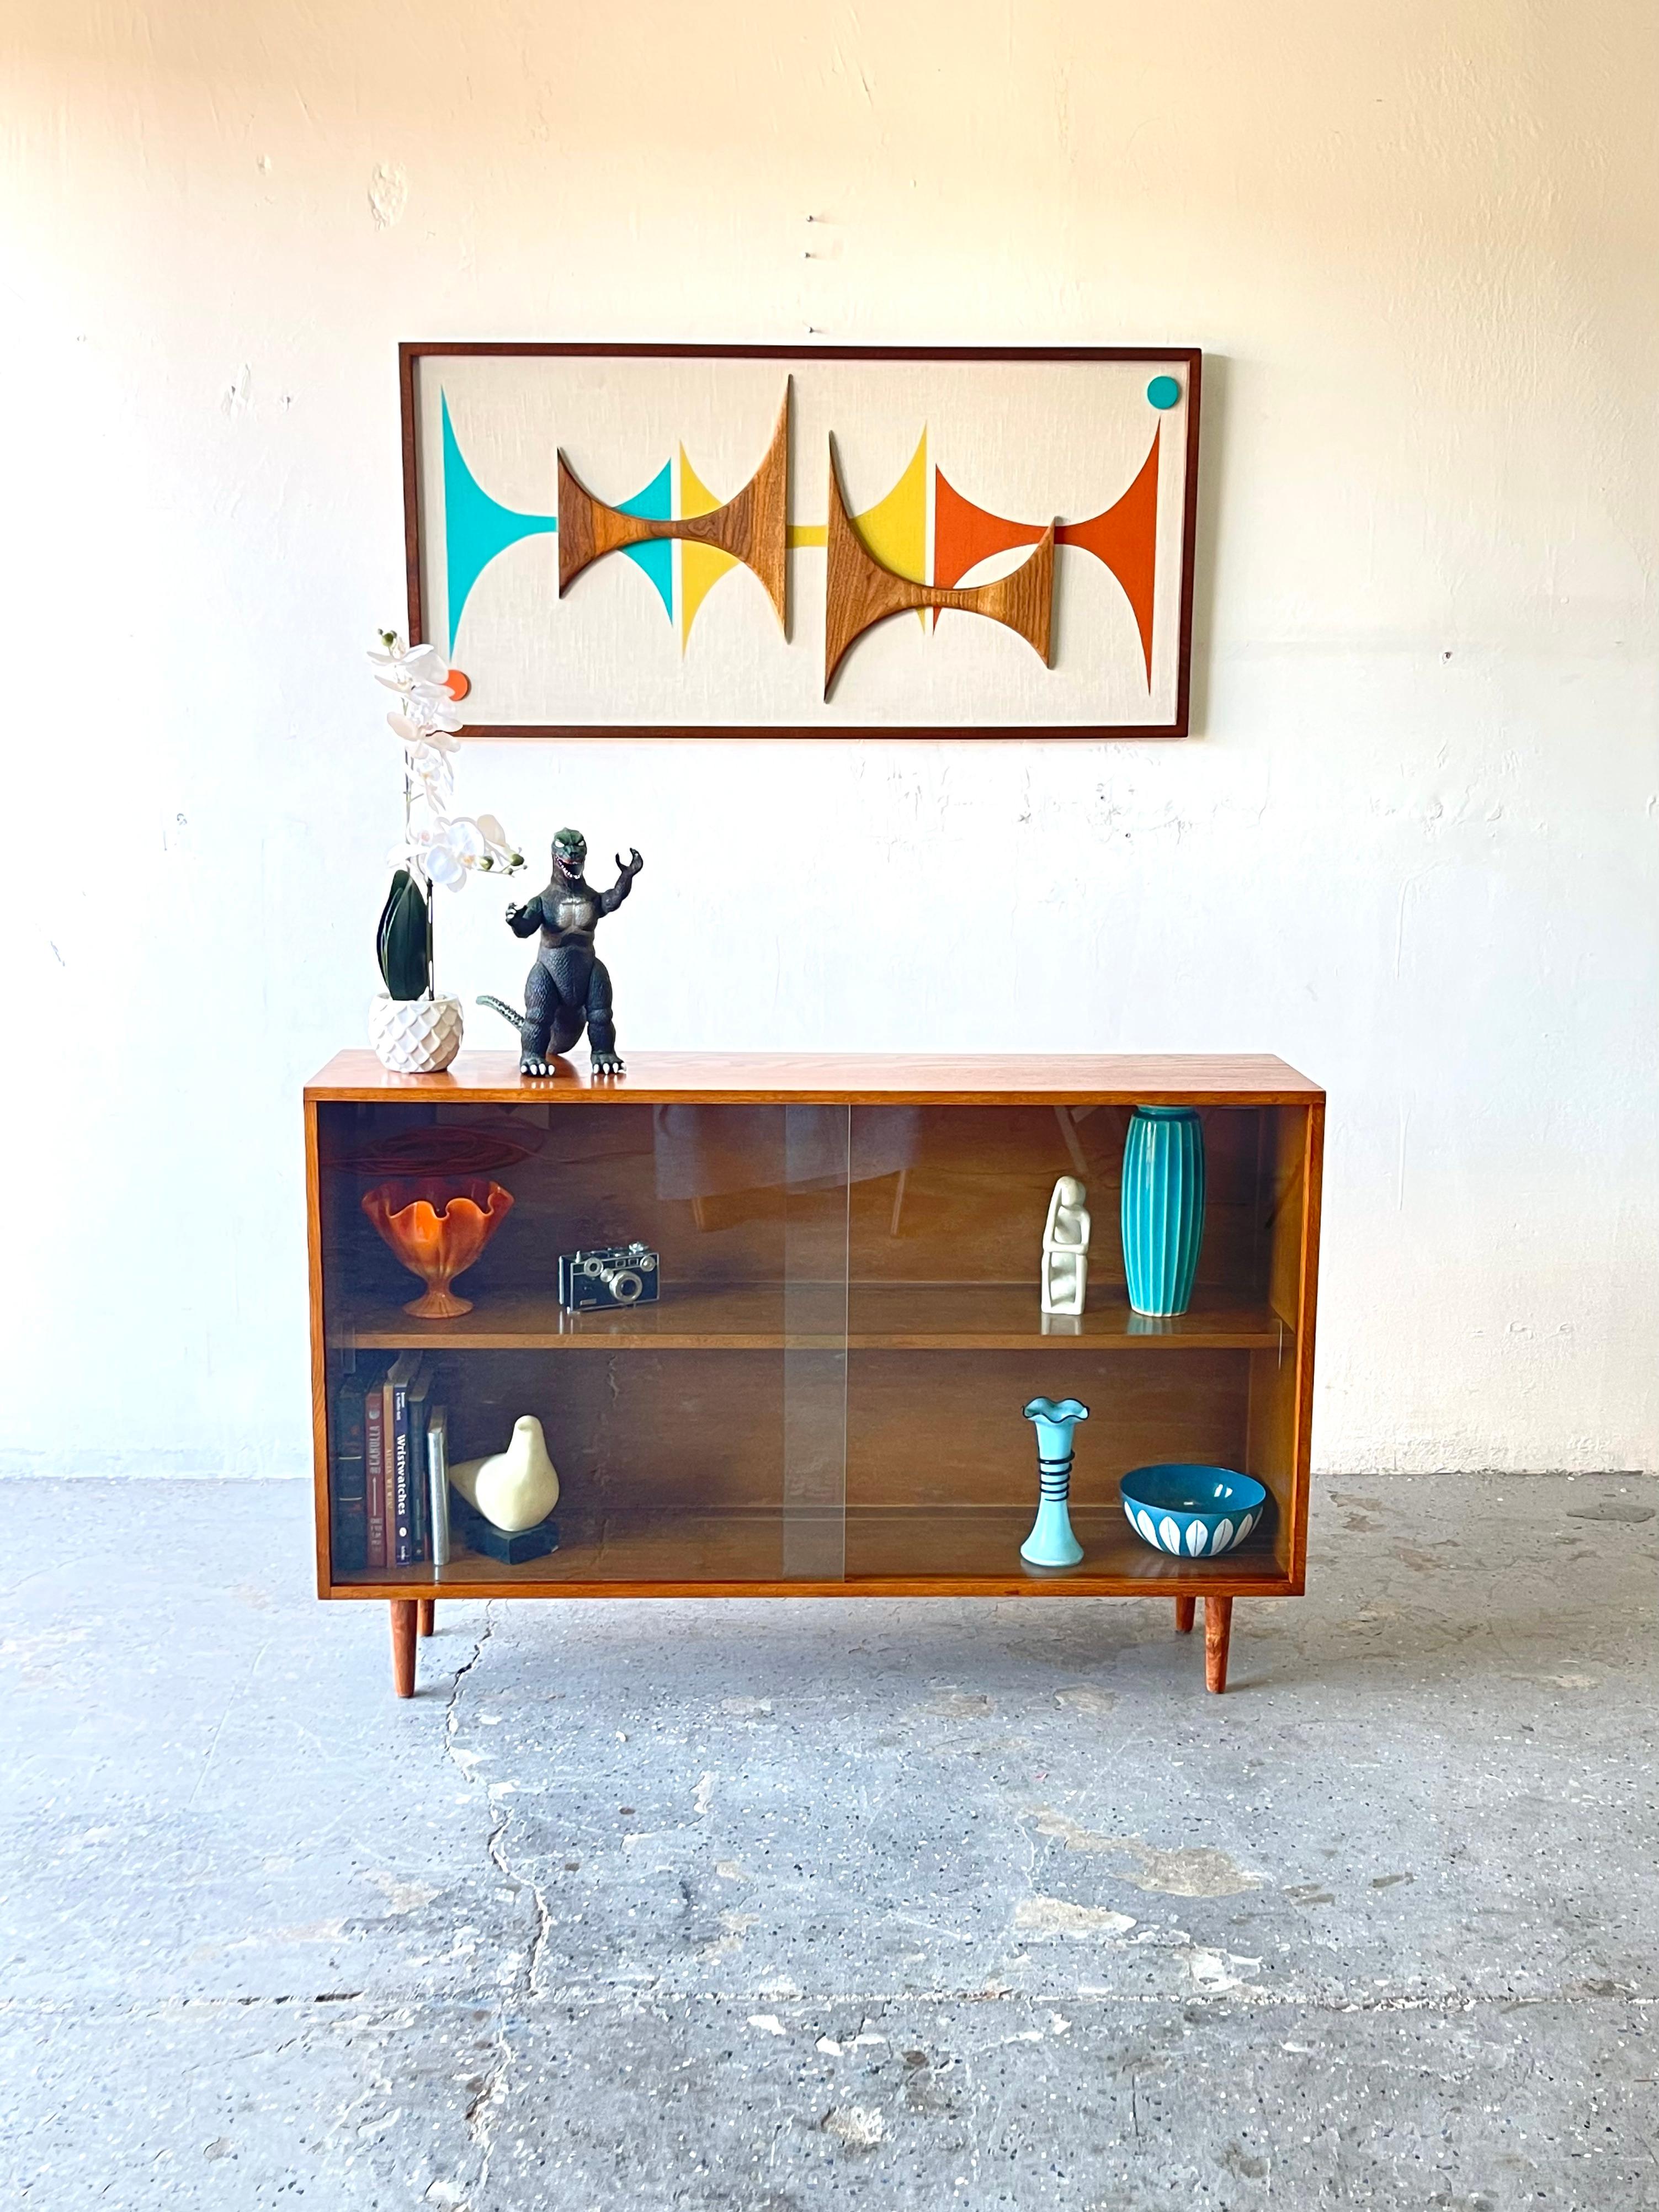 Sliding glass door Mid-Century Modern China display cabinet bookcase.

Need a place to store books, glassware or something else cool that you like to collect? This mid century modern cabinet with glass doors is a great solution!

This vintage